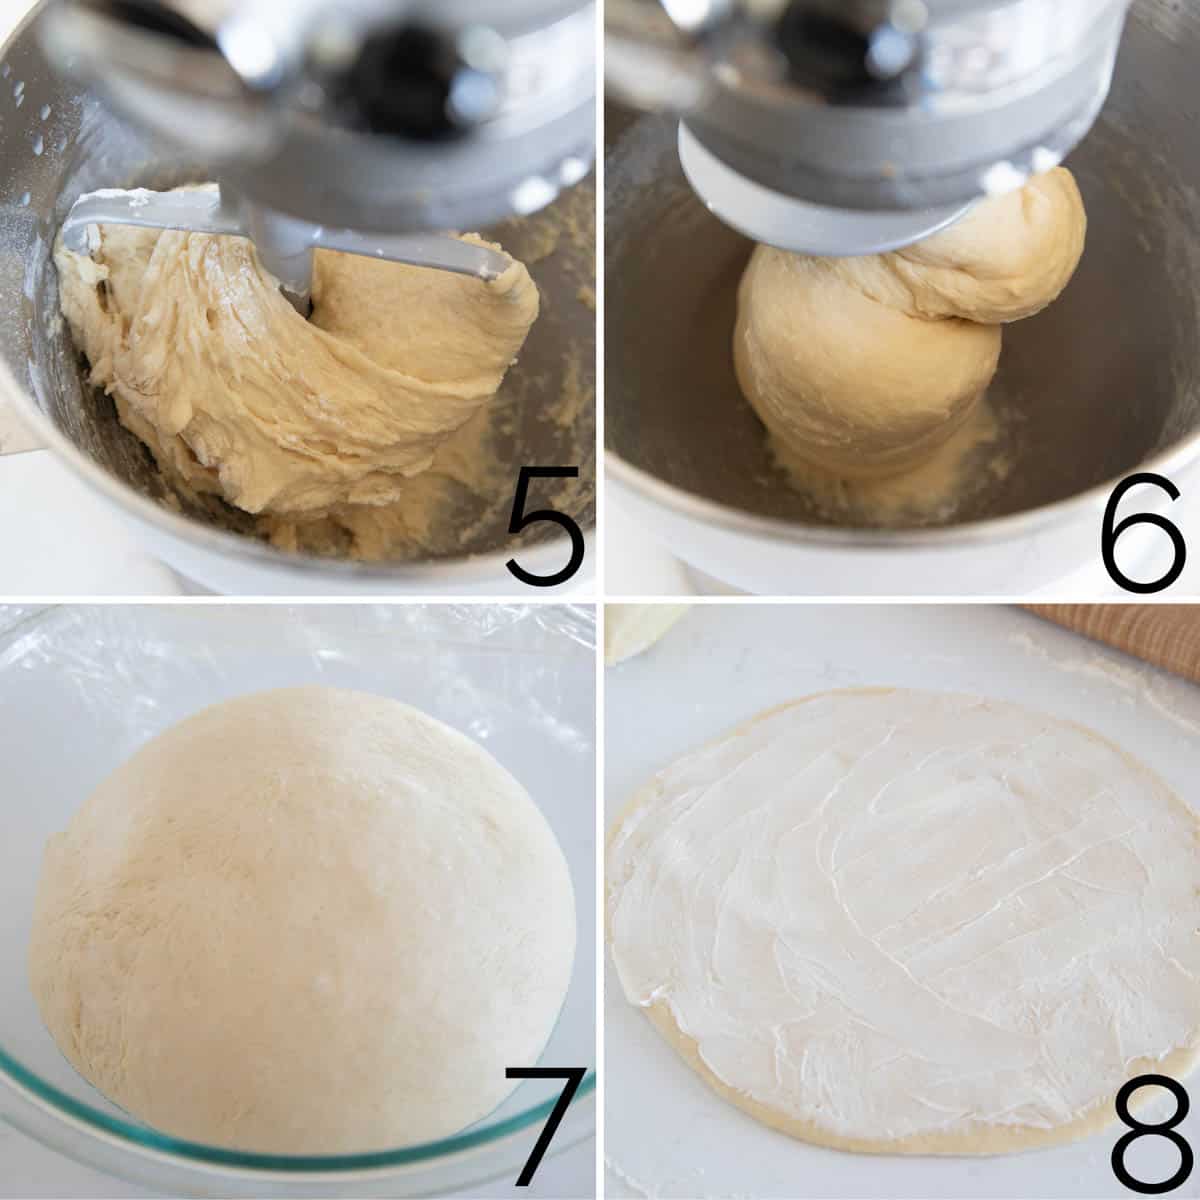 Steps for making butterhorn rolls, including kneading the dough, letting it rise, and rolling the dough and adding butter.